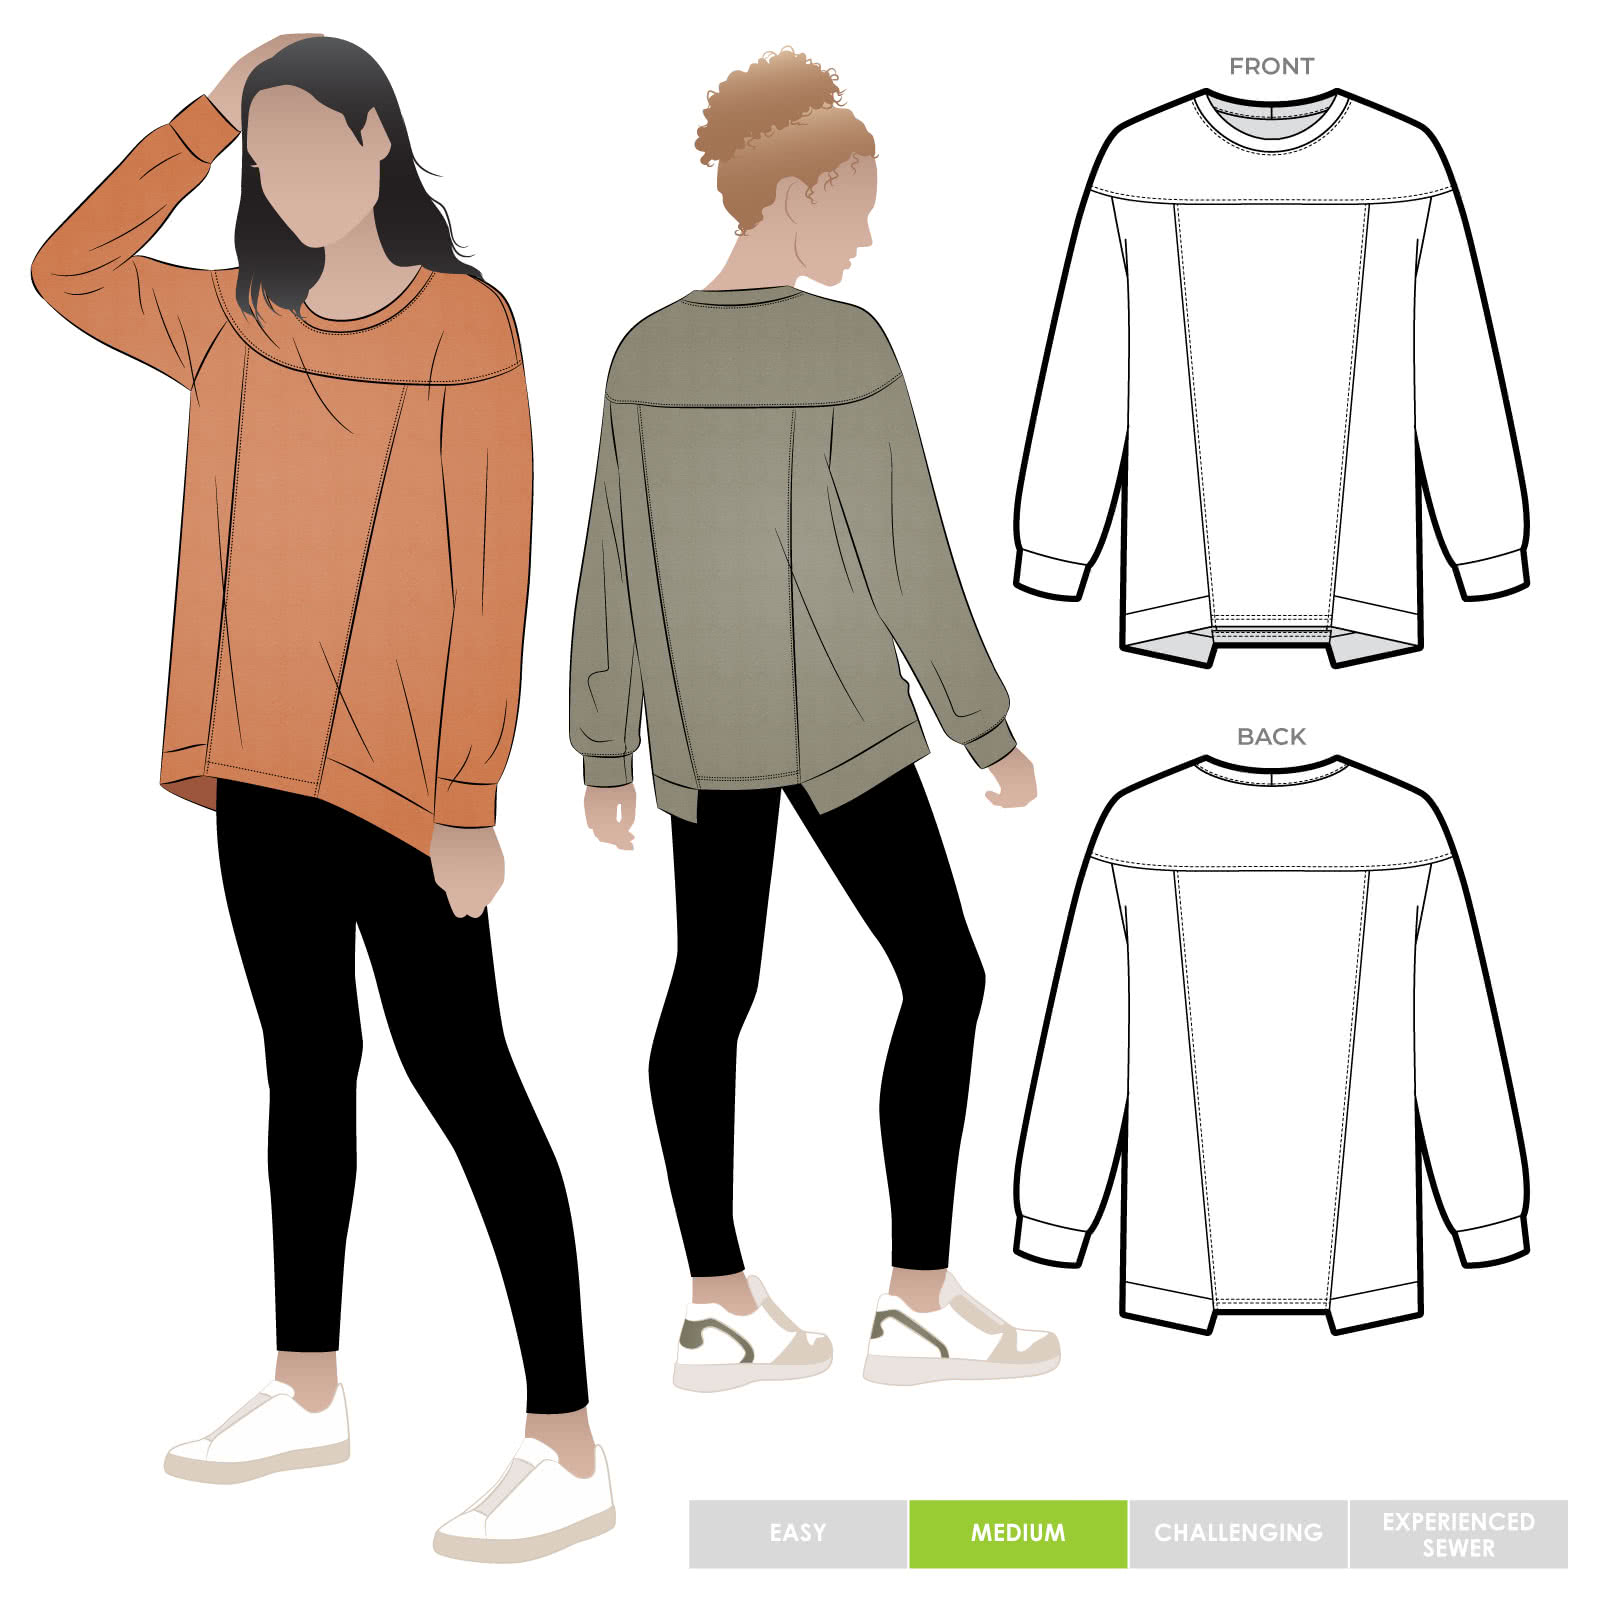 Looking for plus-size pattern similar to this fleece pullover : r/sewing